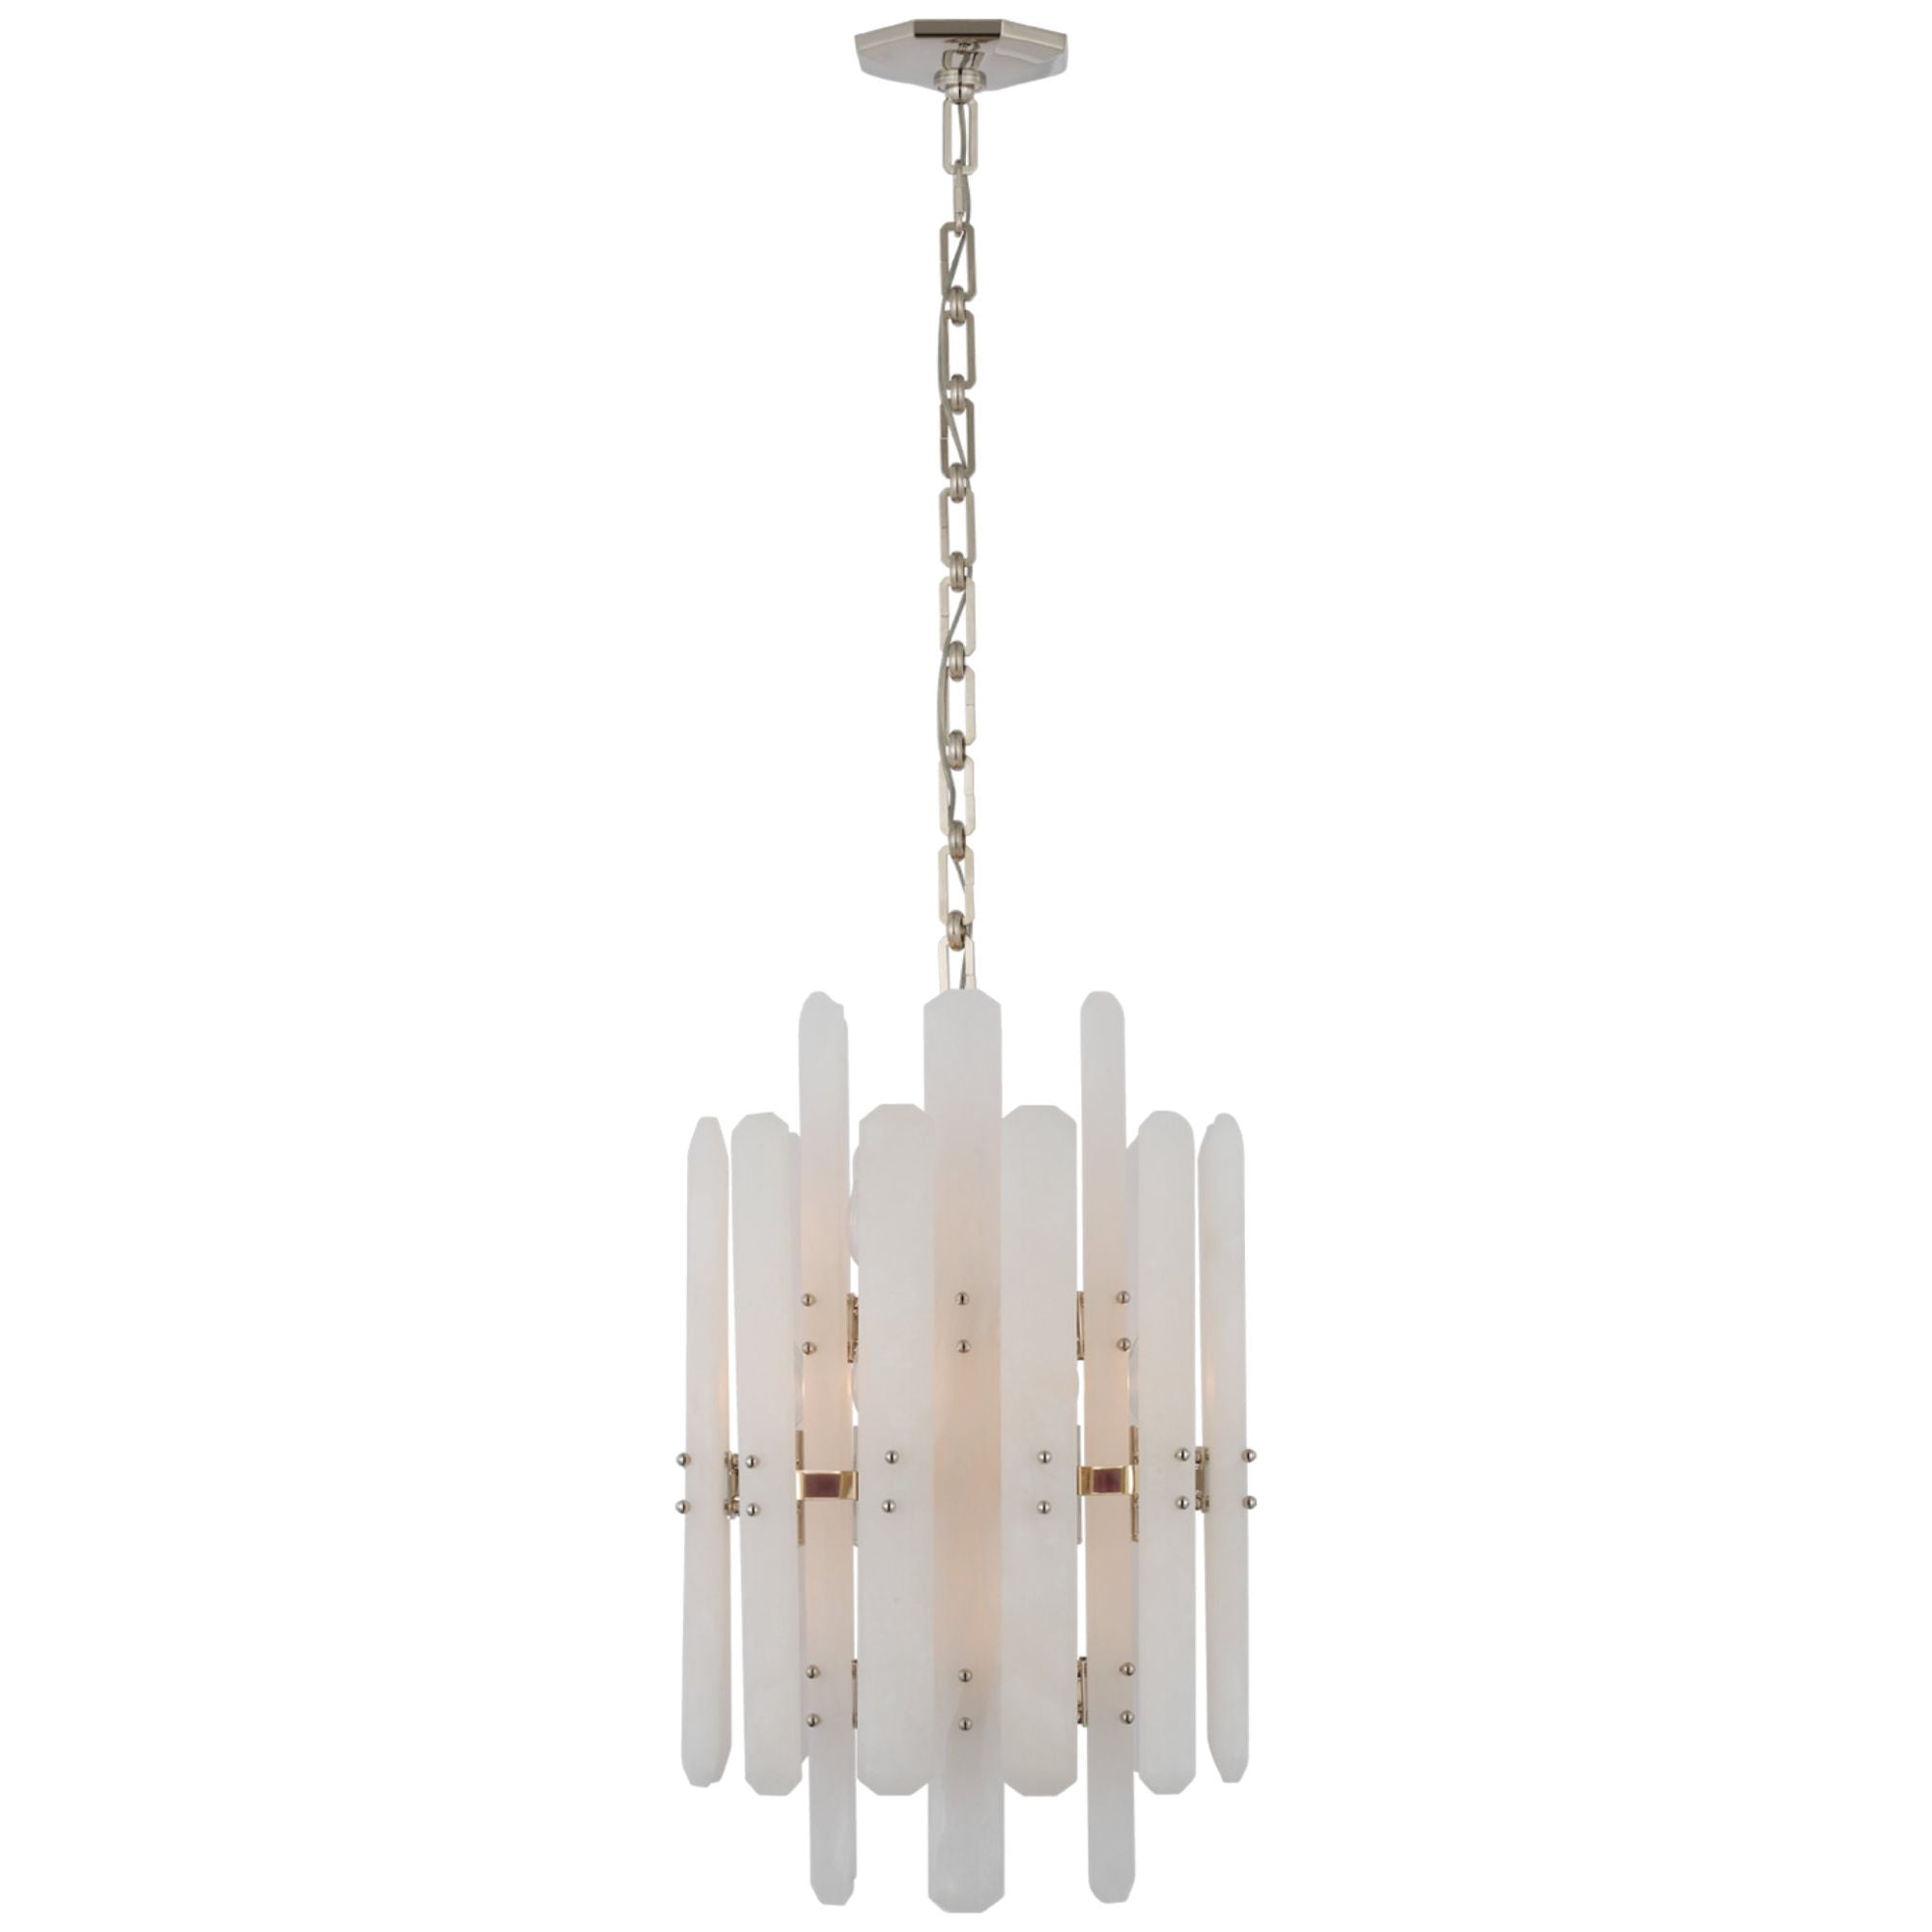 AERIN Bonnington Tall Chandelier in Polished Nickel with Alabaster